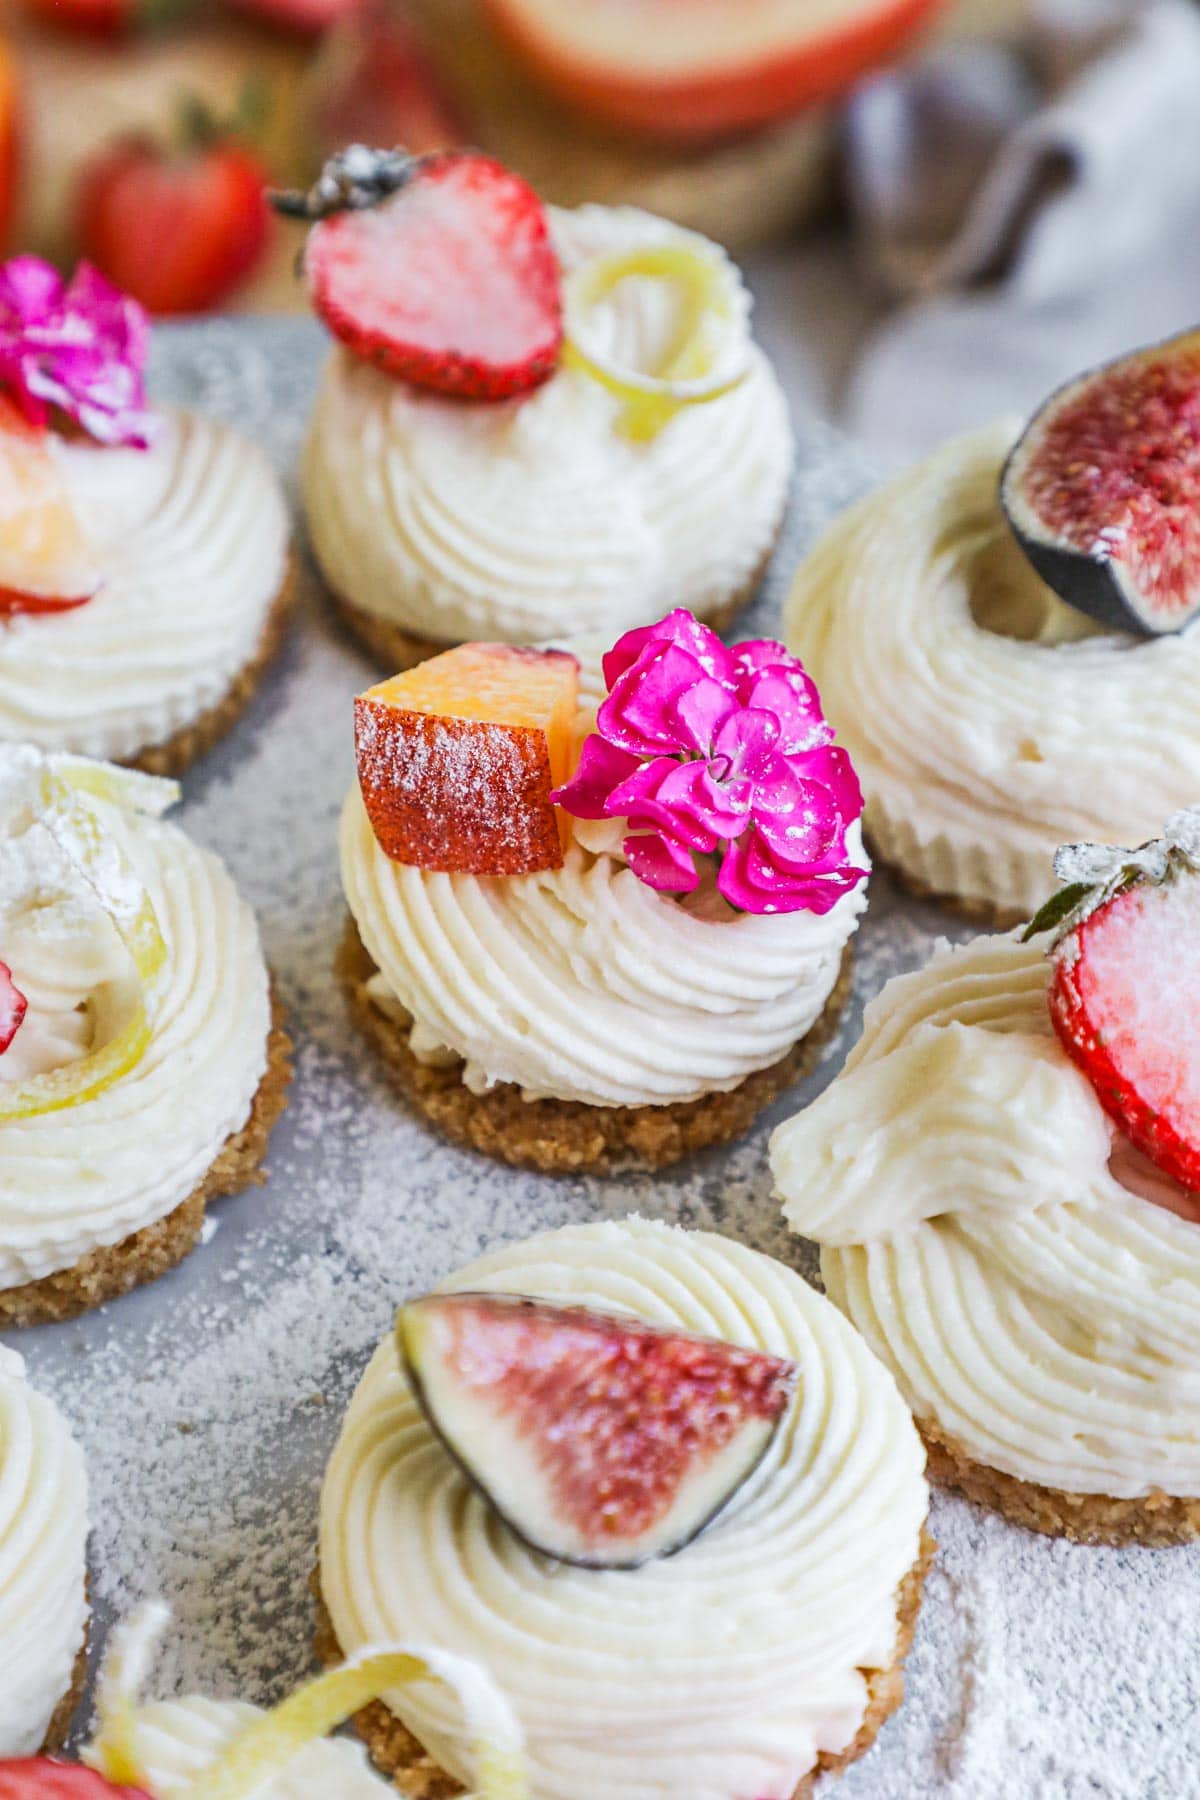 No-bake mini cheesecakes topped with fresh strawberries, figs, peaches, nectarines, and edible flowers.